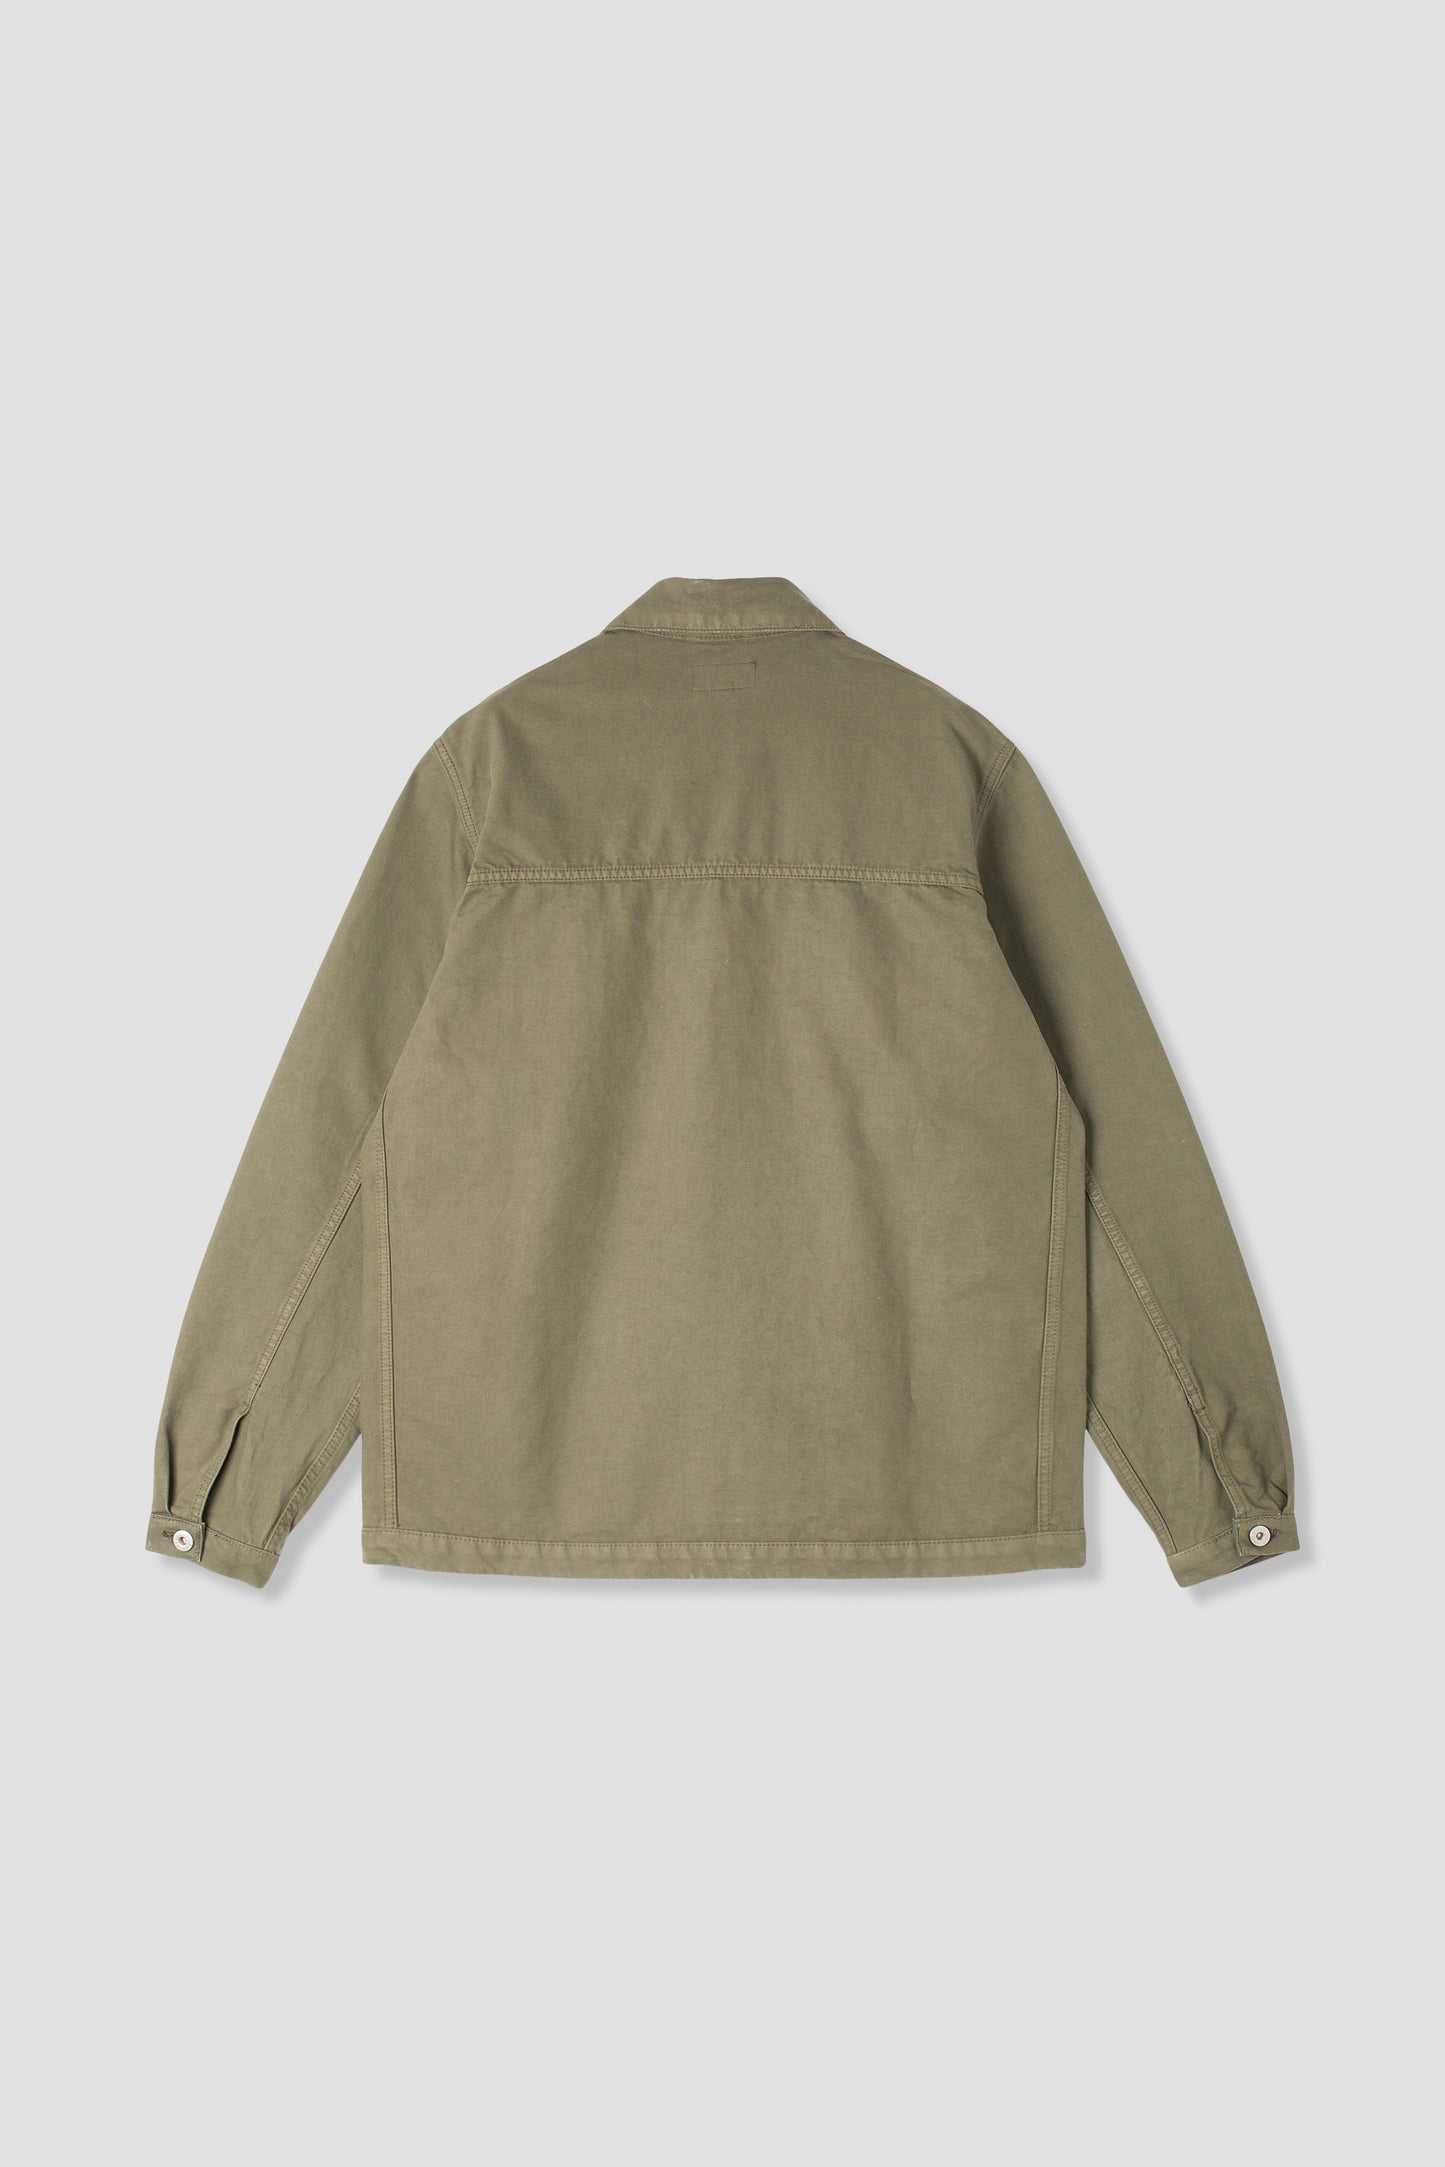 Coverall Jacket (Unlined) (Olive Twill)